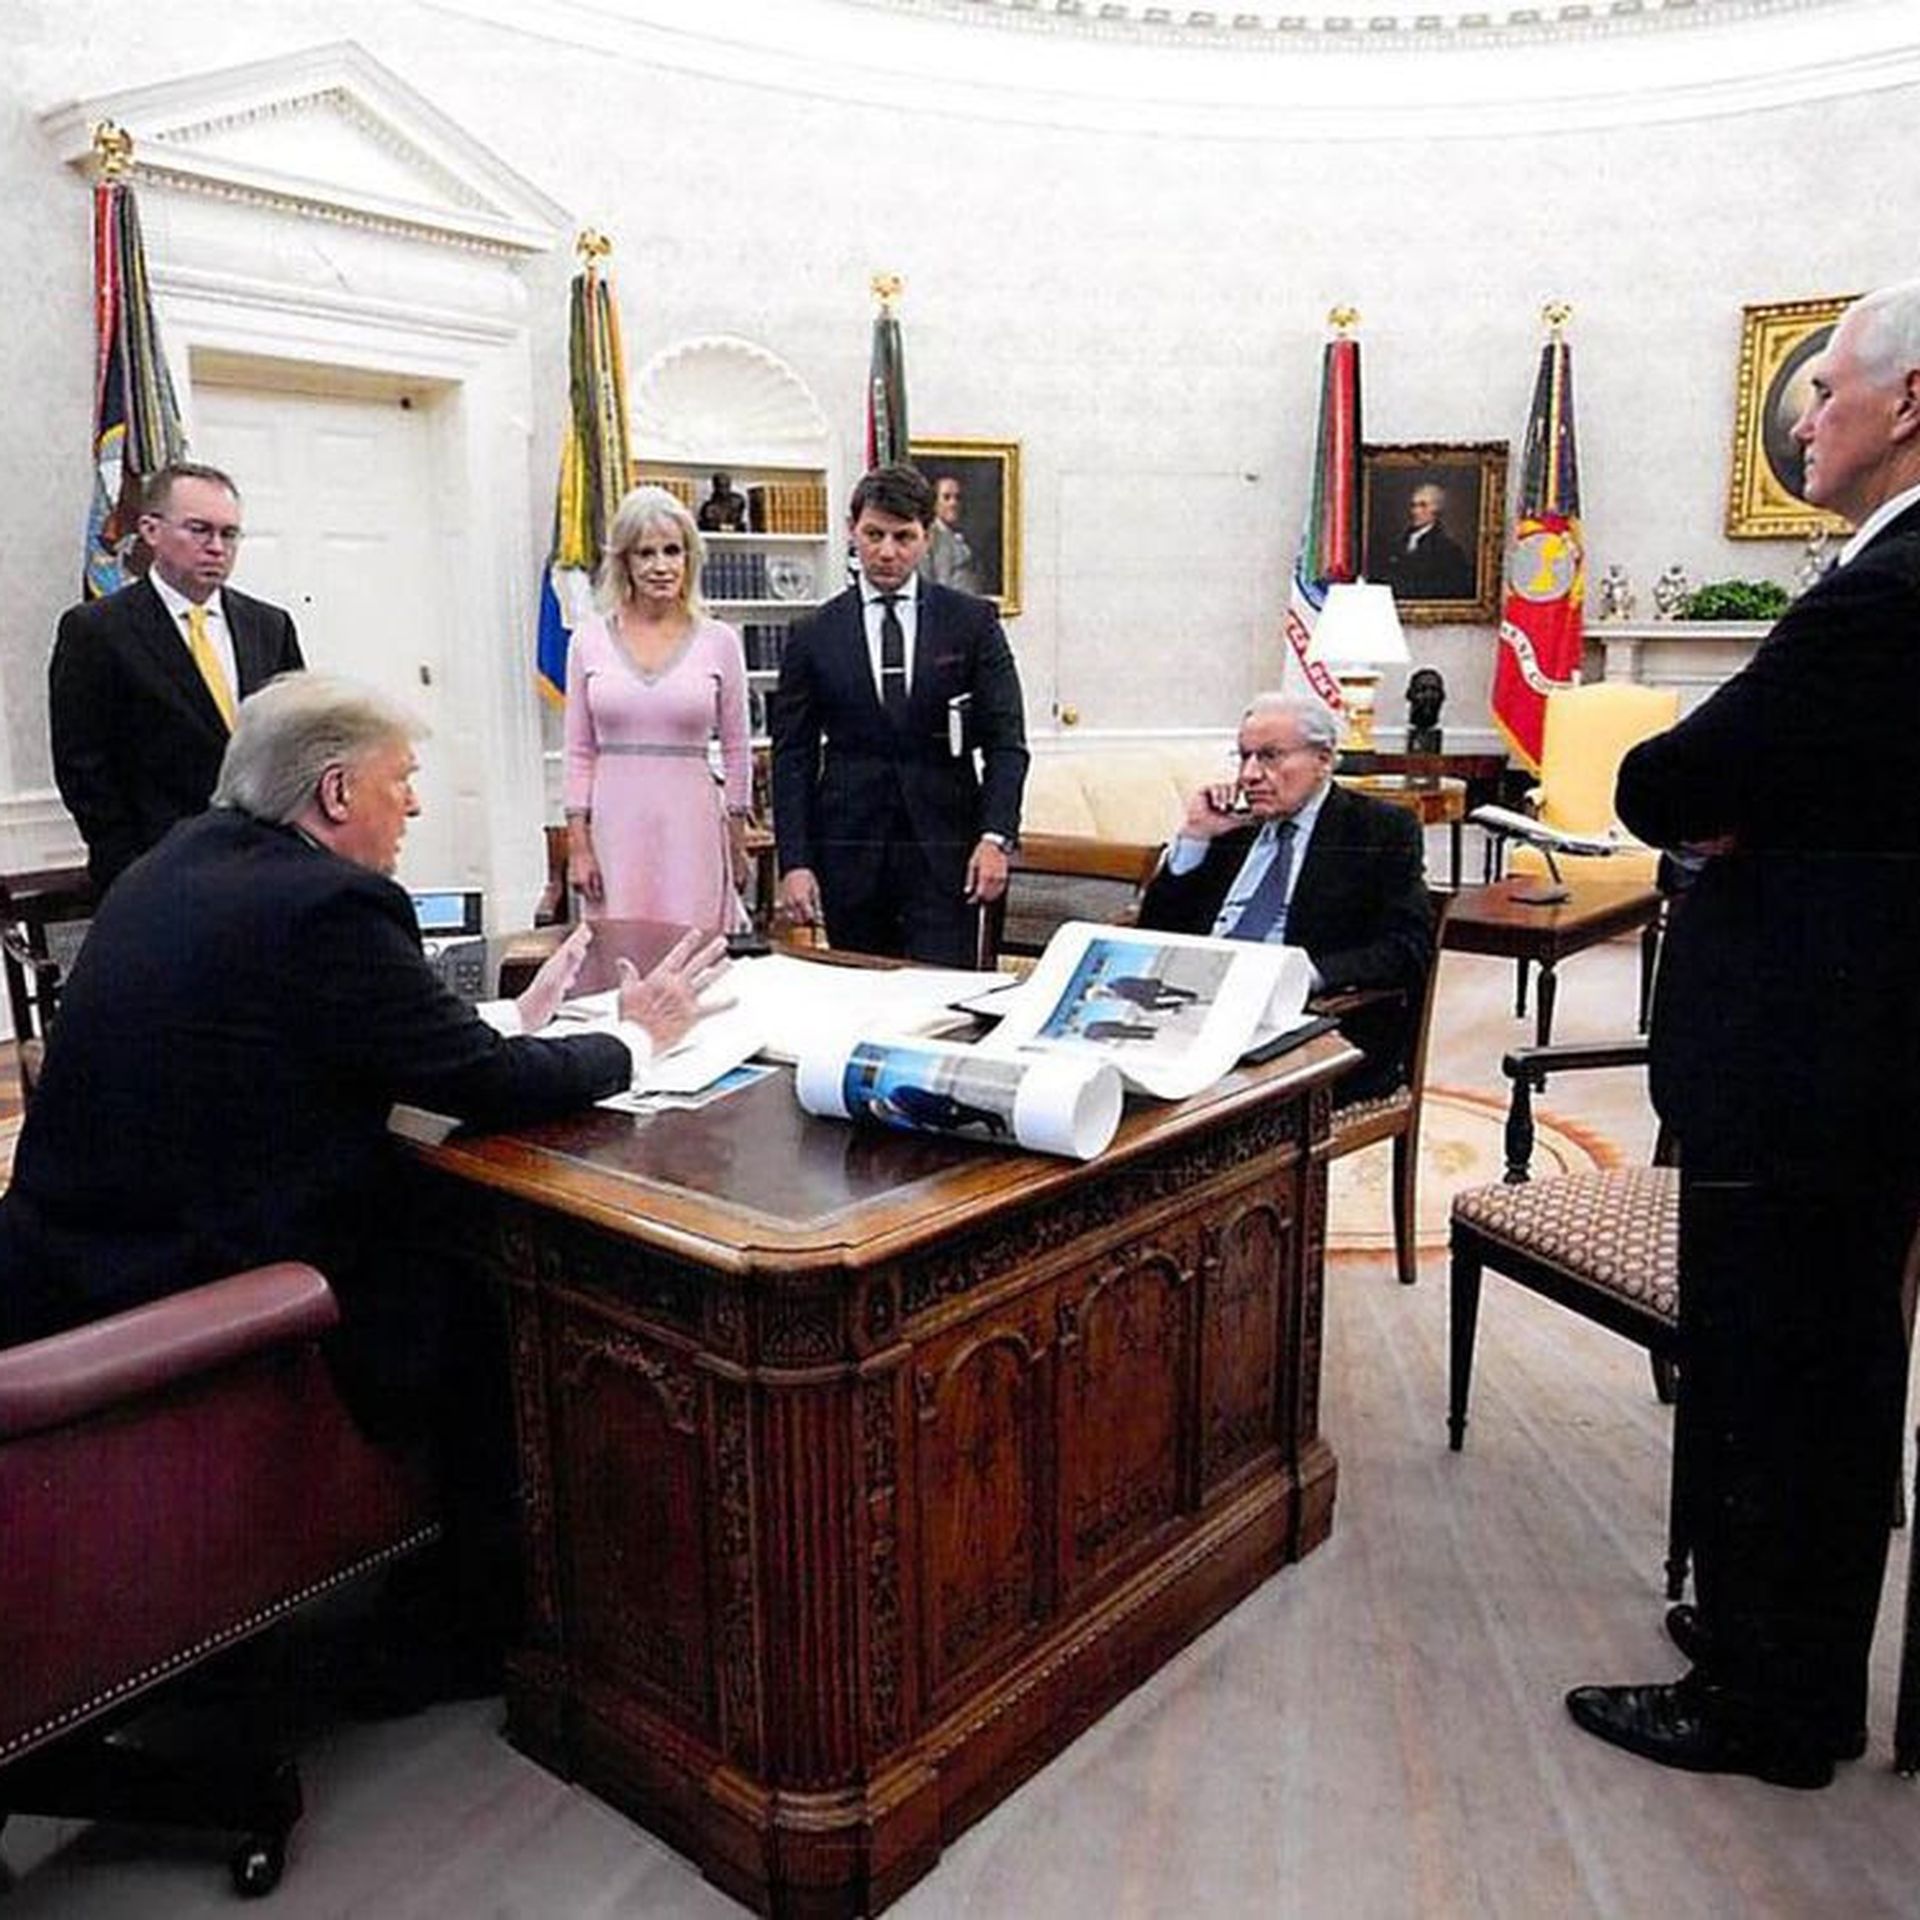 Photo gives look at Bob Woodward interviewing Trump in Oval Office